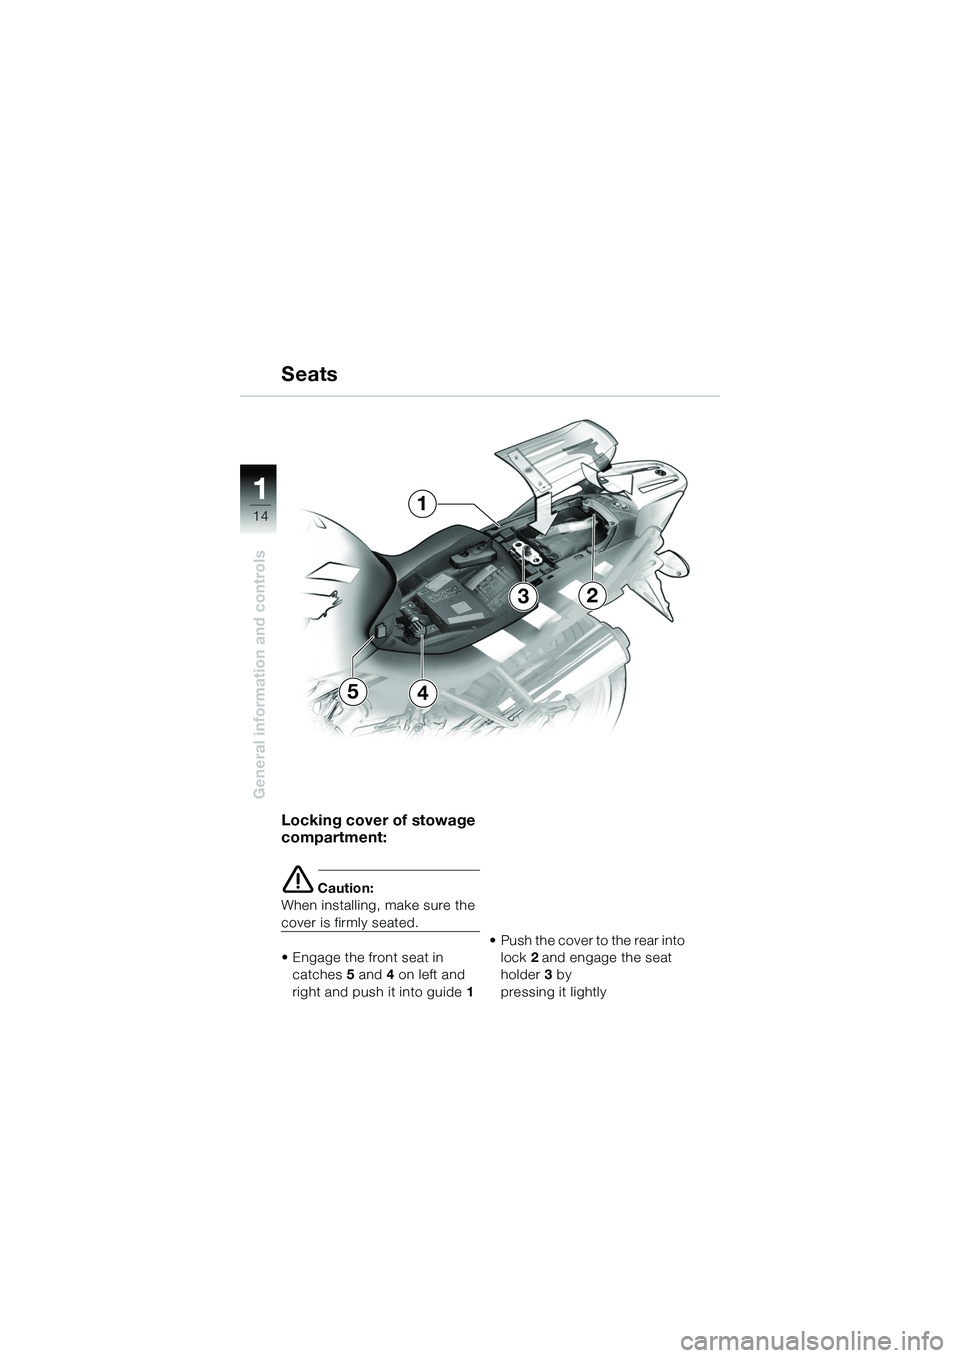 BMW MOTORRAD R 1150 R 2002  Riders Manual (in English) 1
General information and controls
14
54
3
1
2
Locking cover of stowage 
compartment:
e Caution:
When installing, make sure the 
cover is firmly seated.
• Engage the front seat in  catches 5 and  4 